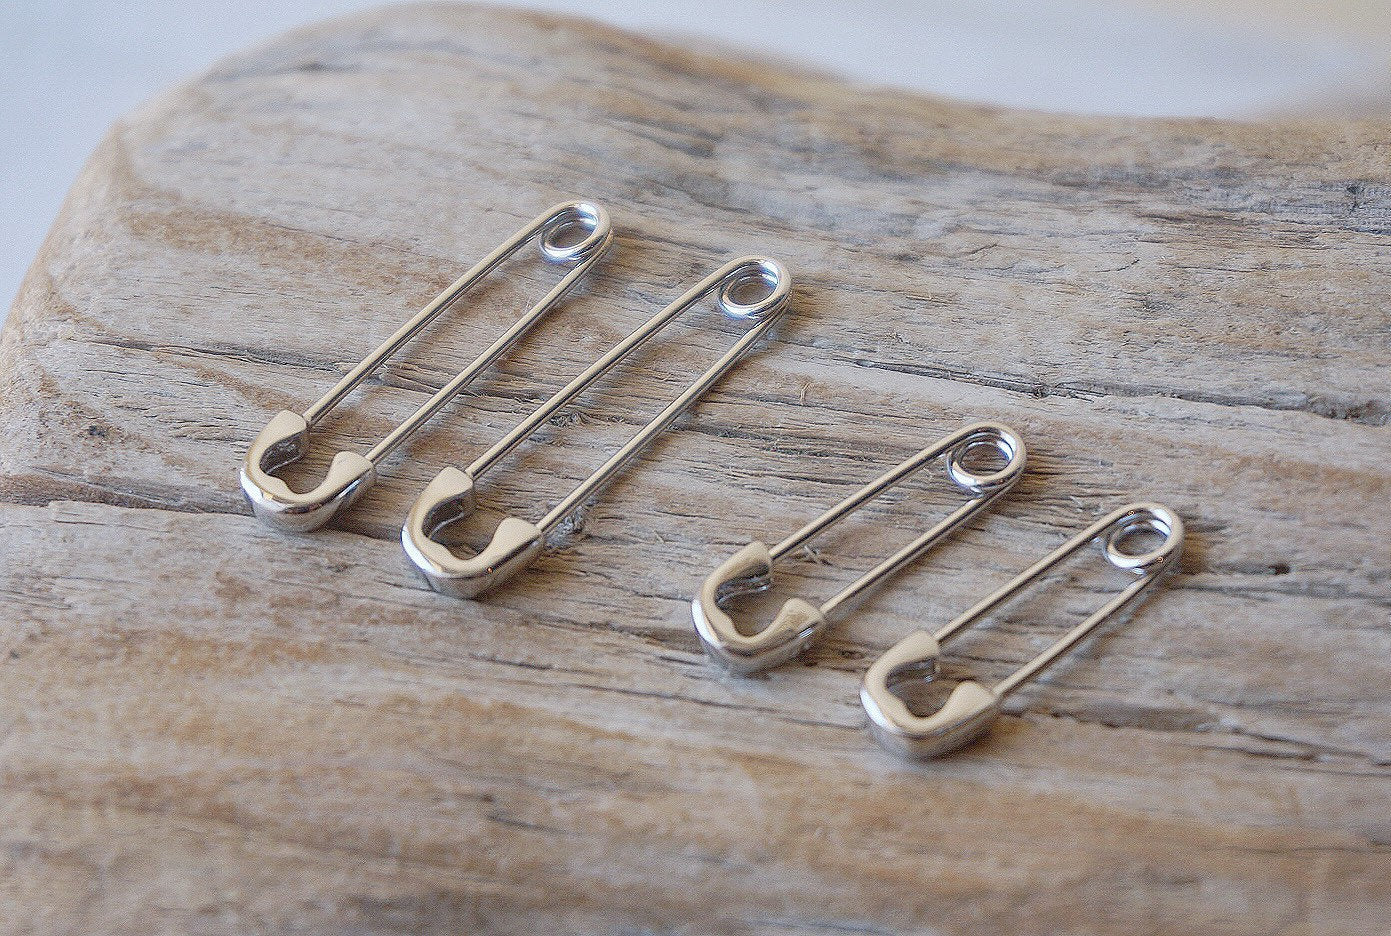 Sterling silver Safety pin earrings/Creative earrings/Safety Pin Pull Through Drop Earrings/Fun Quirky Punk Rock Jewelry